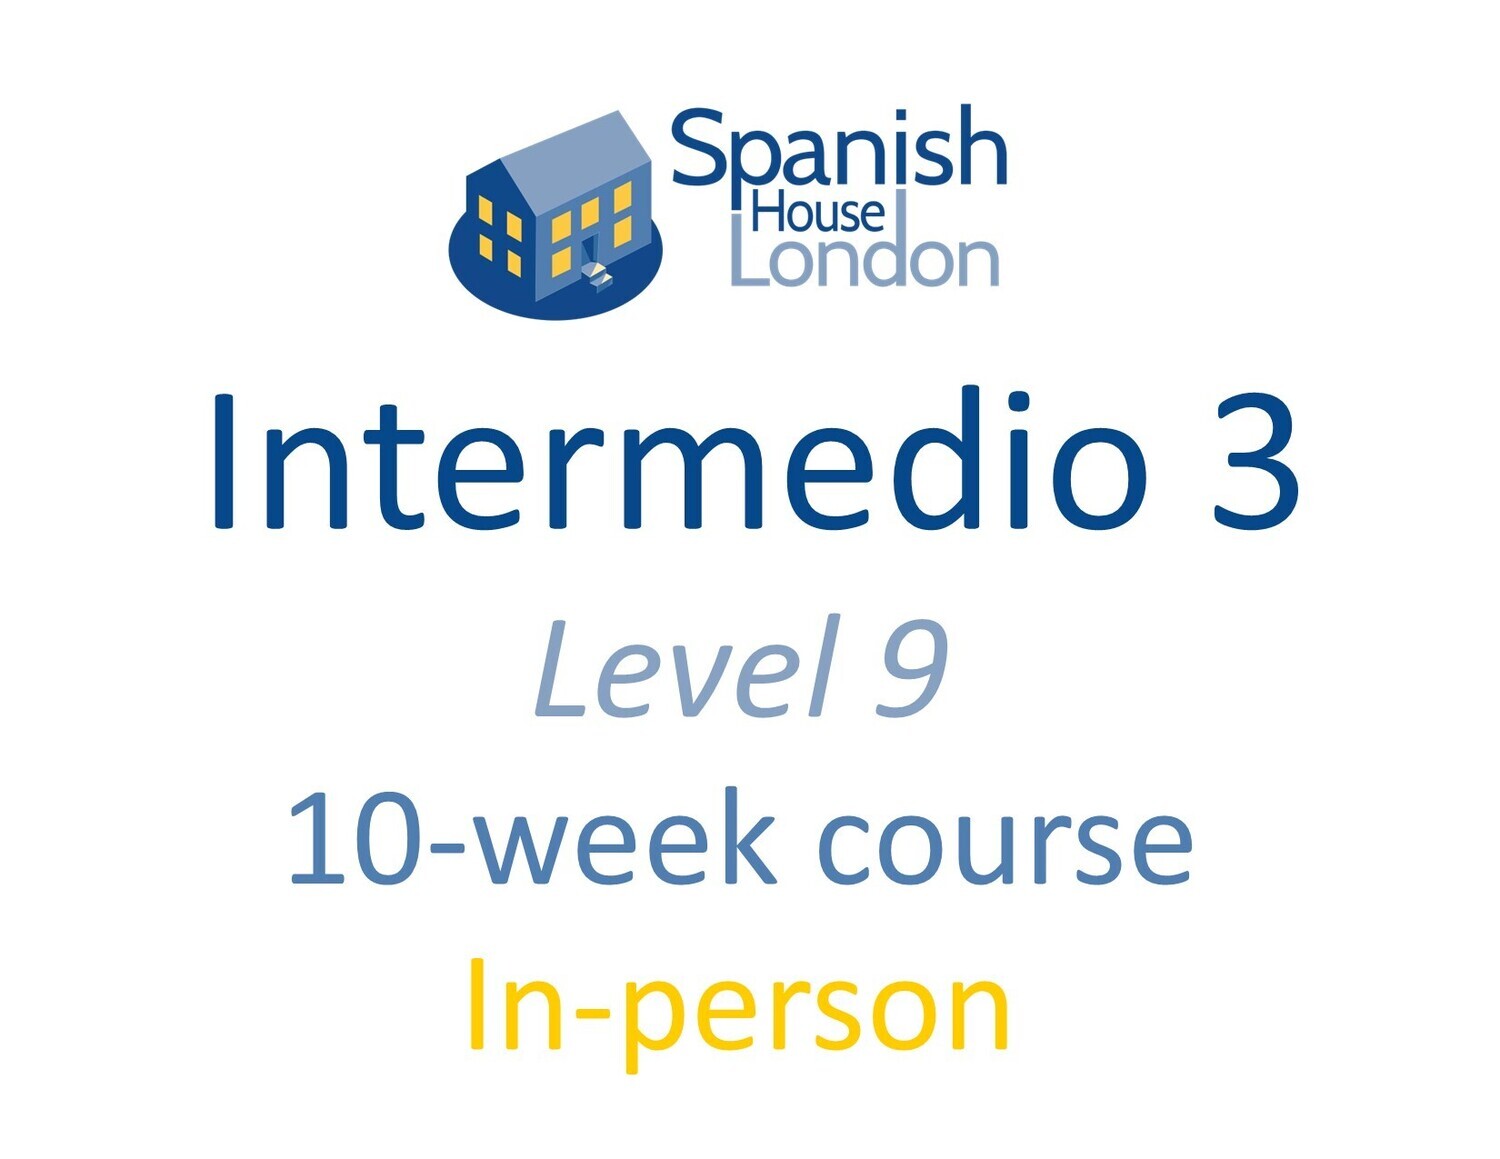 Intermedio 3 Course starting on 20th November at 6pm Online